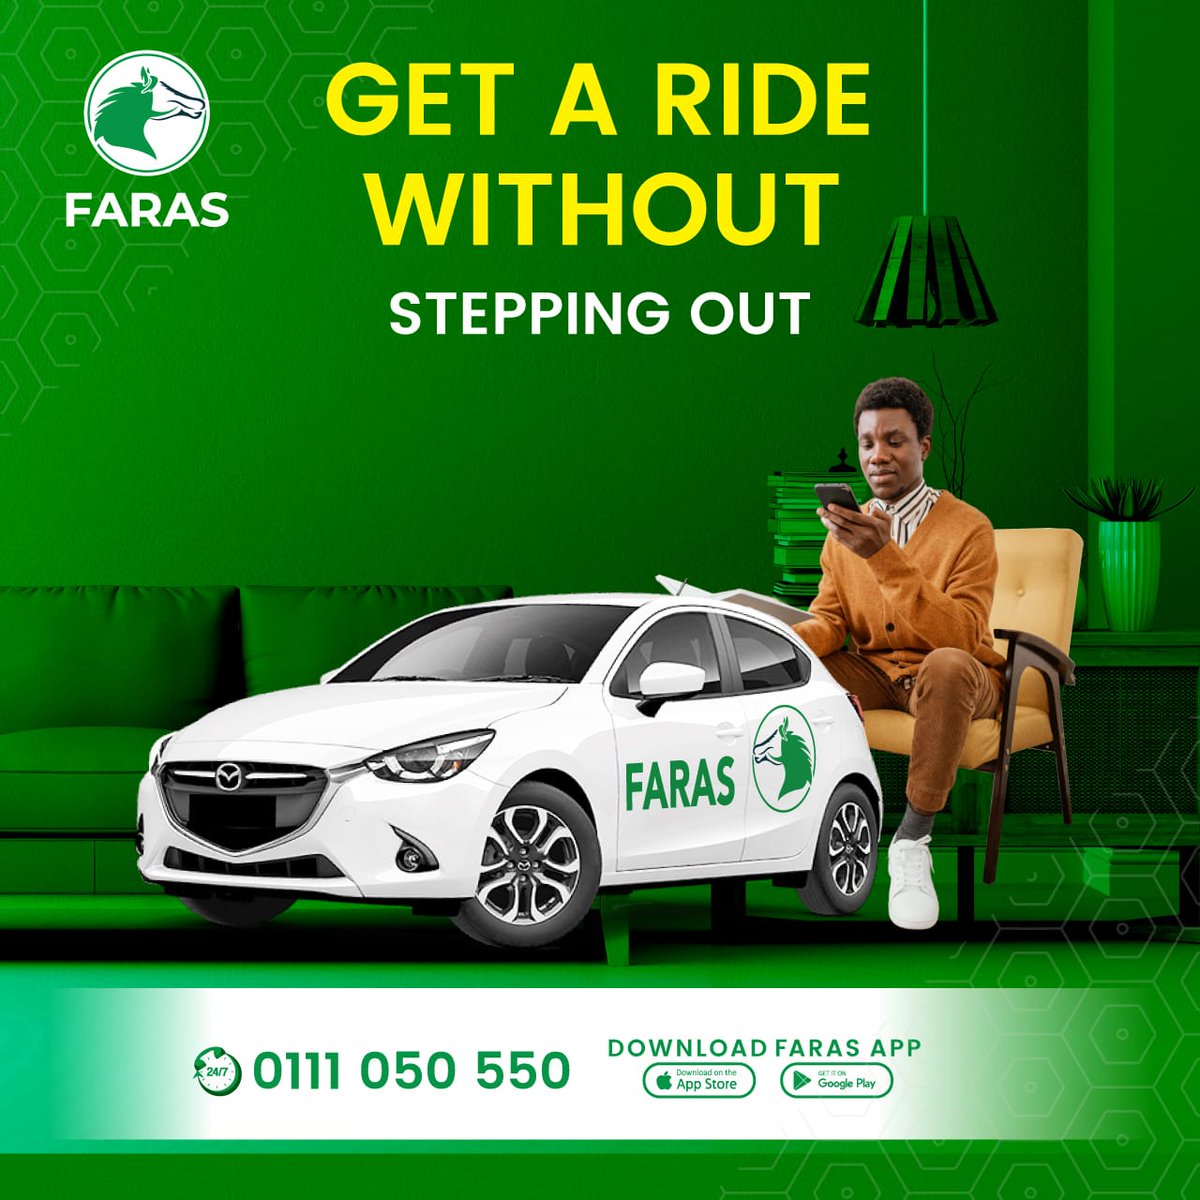 Download the FARAS APP and book your ride from the comfort of house
@farasKenya 
#FarasLoyaltyAwards